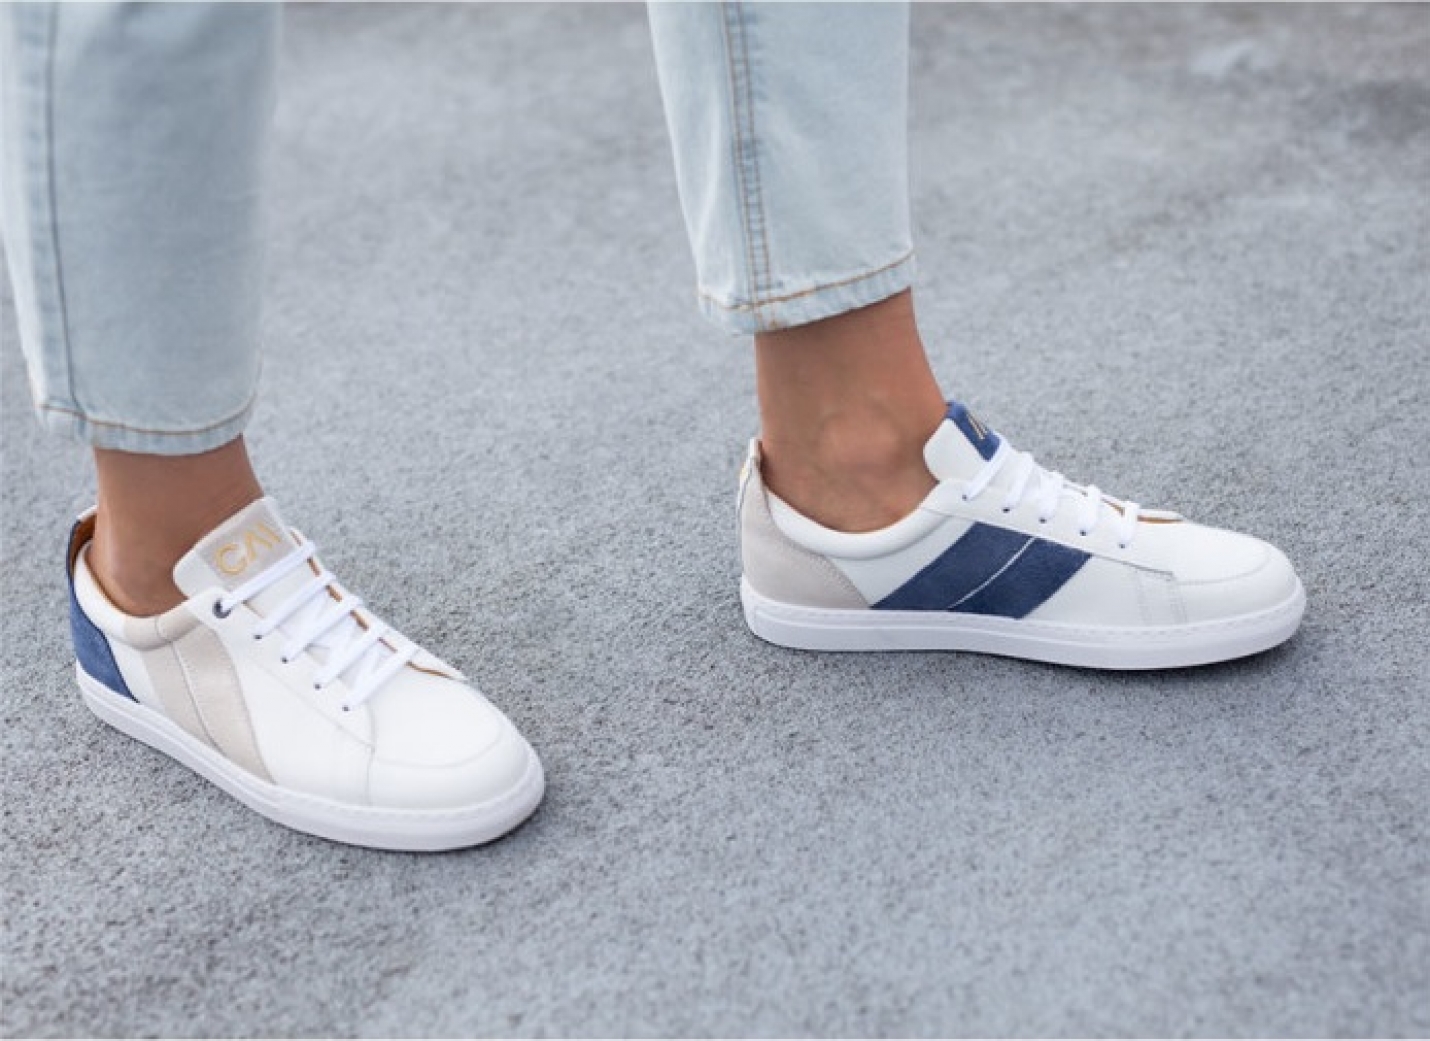 CAVAL. The World’s First Mismatched Sneakers on Indiegogo - Smart Galileo